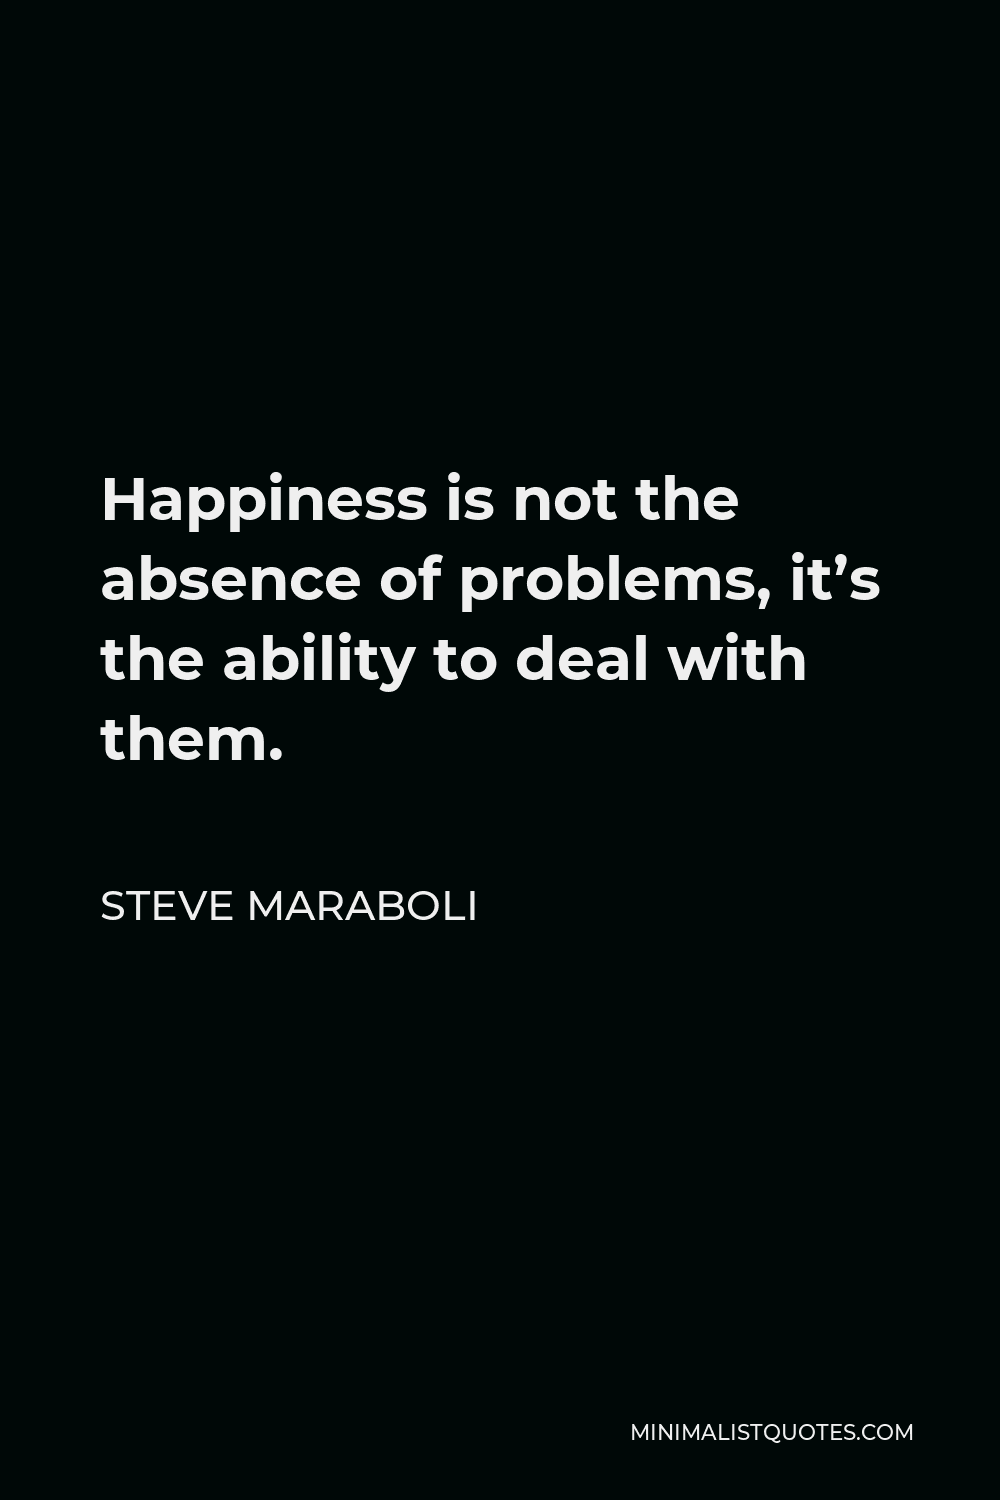 Steve Maraboli Quote - Happiness is not the absence of problems; it’s the ability to deal with them.